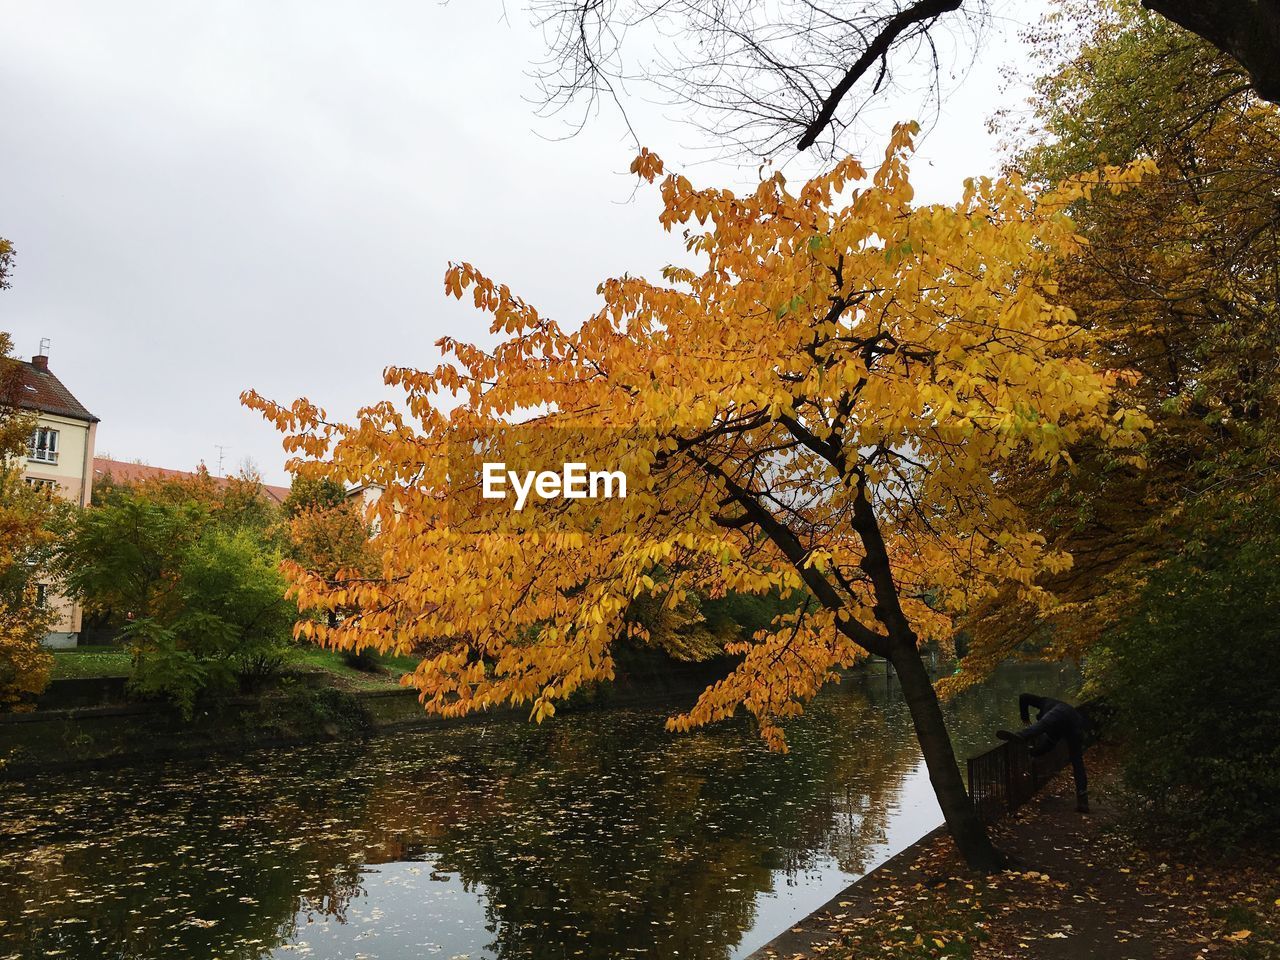 VIEW OF AUTUMNAL TREES IN PARK